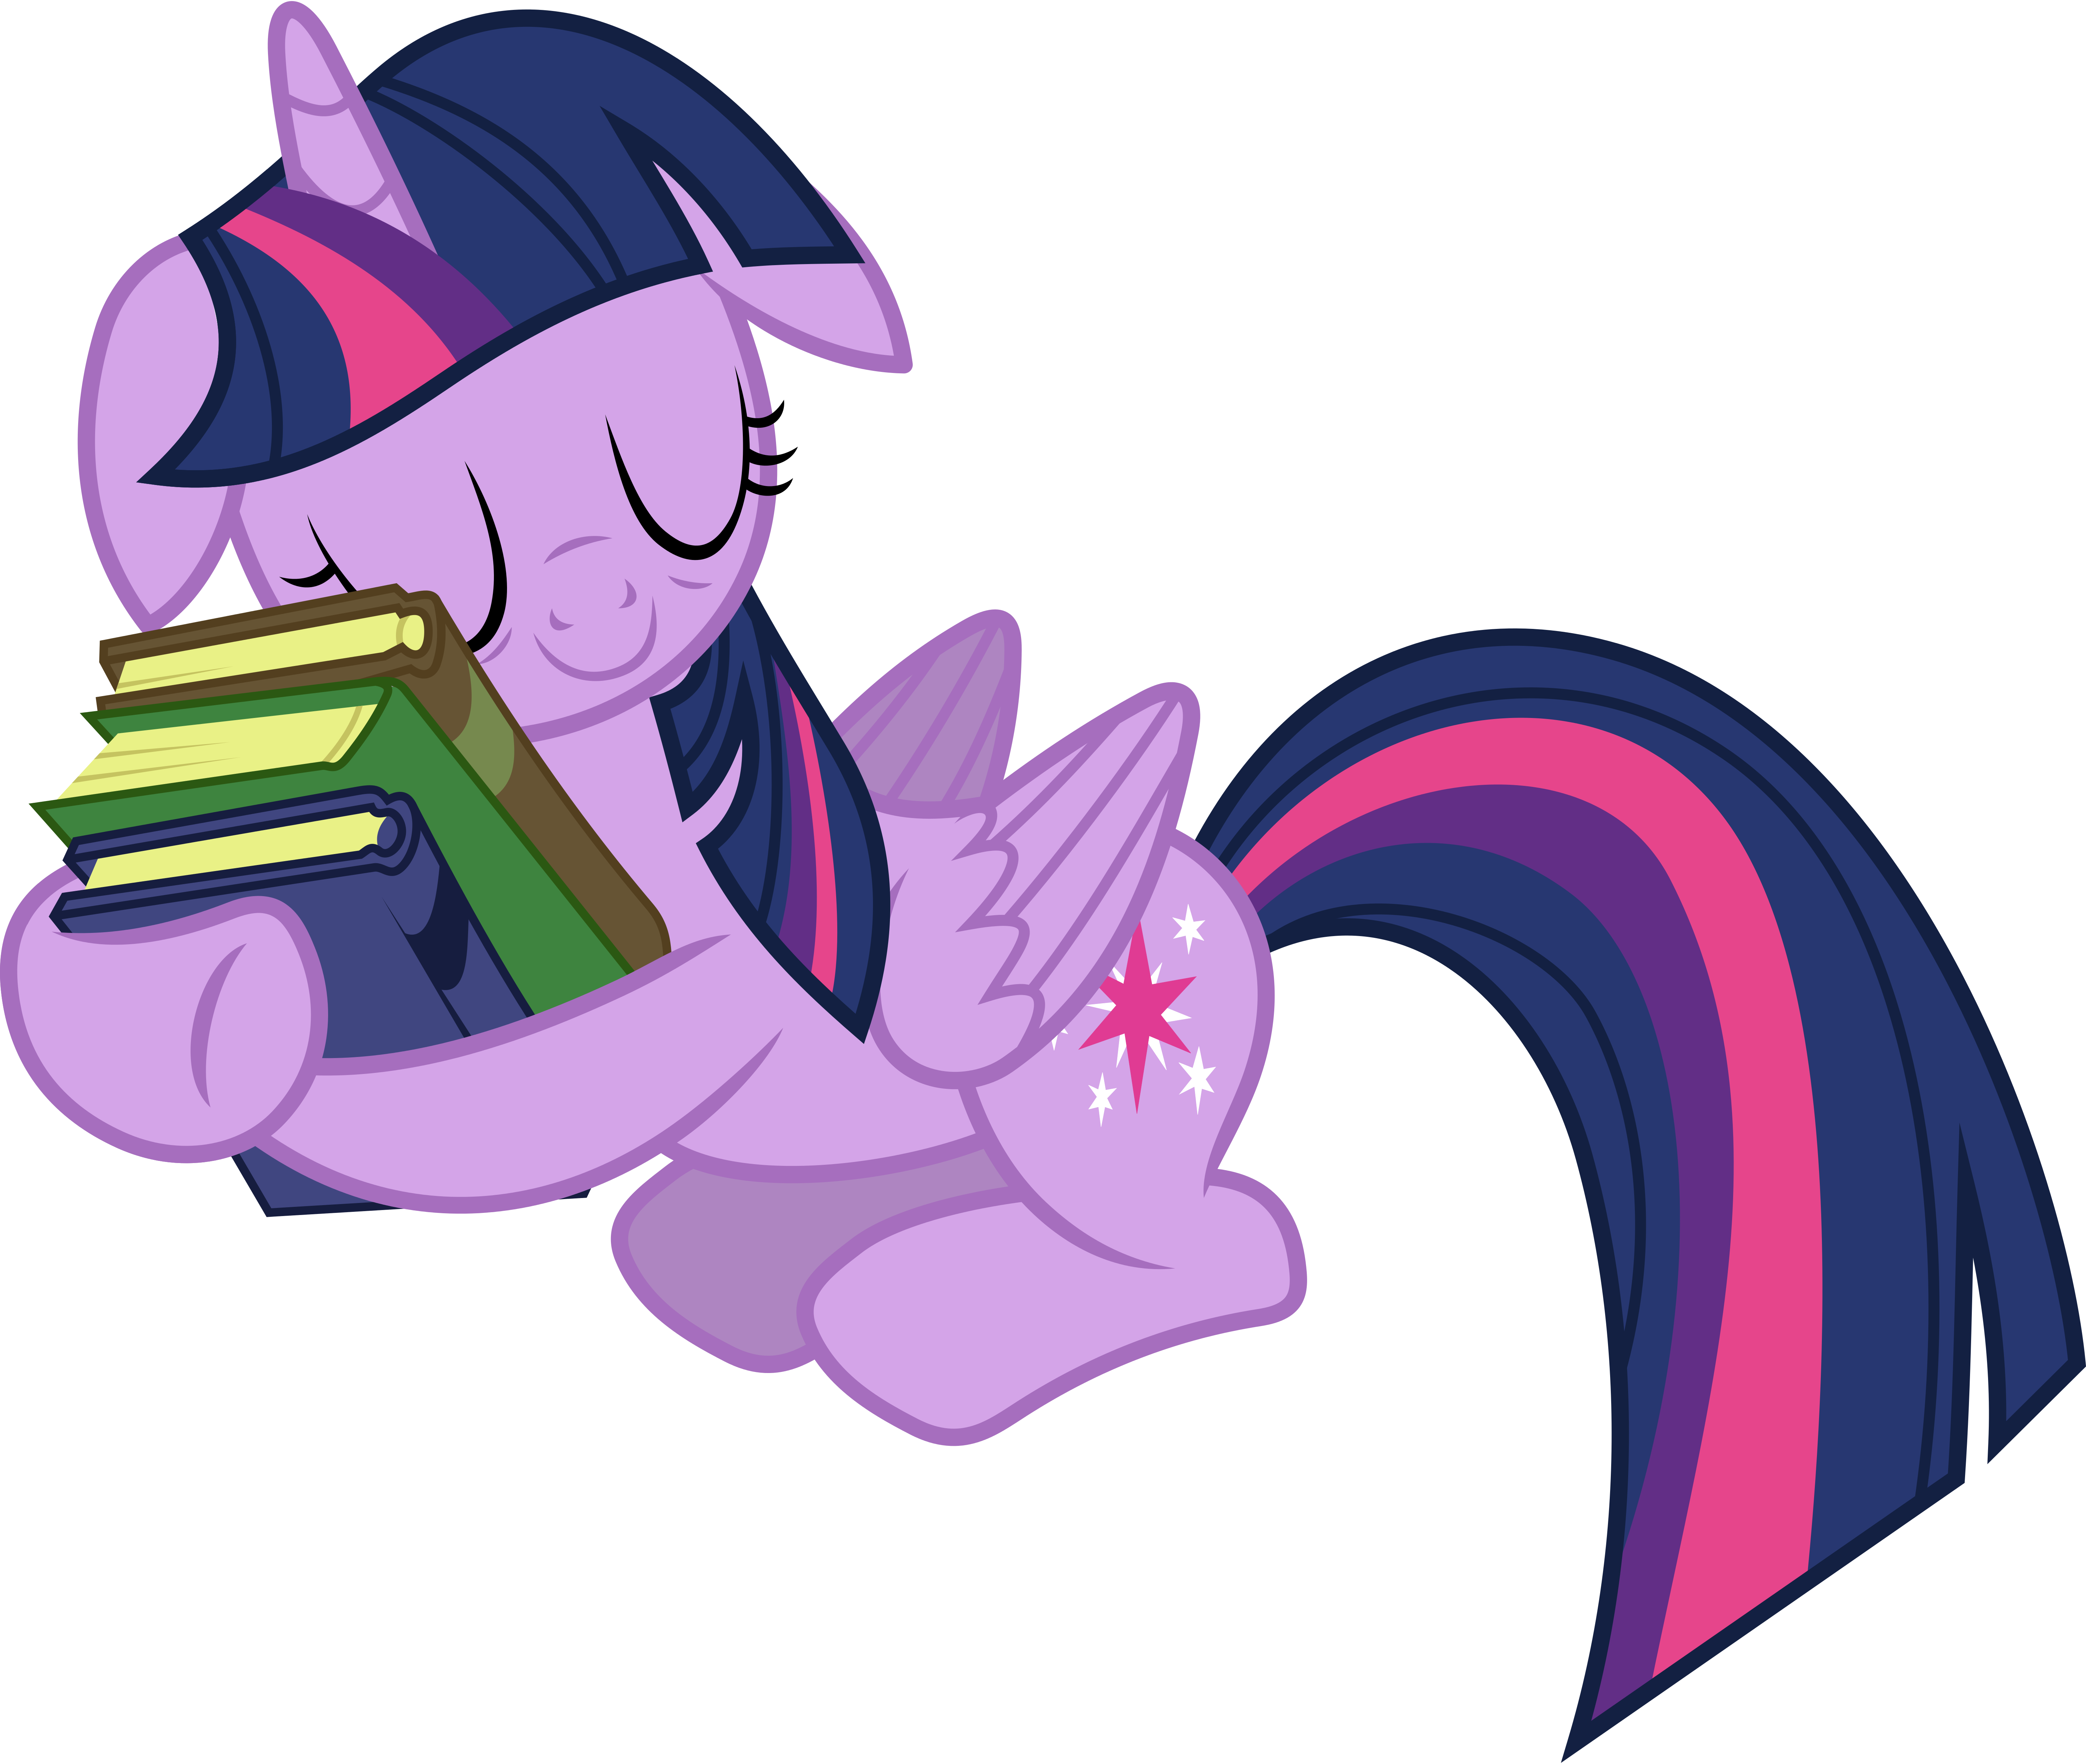 Reality Warper Tv Tropes - Twilight Sparkle And Books (5900x4990)